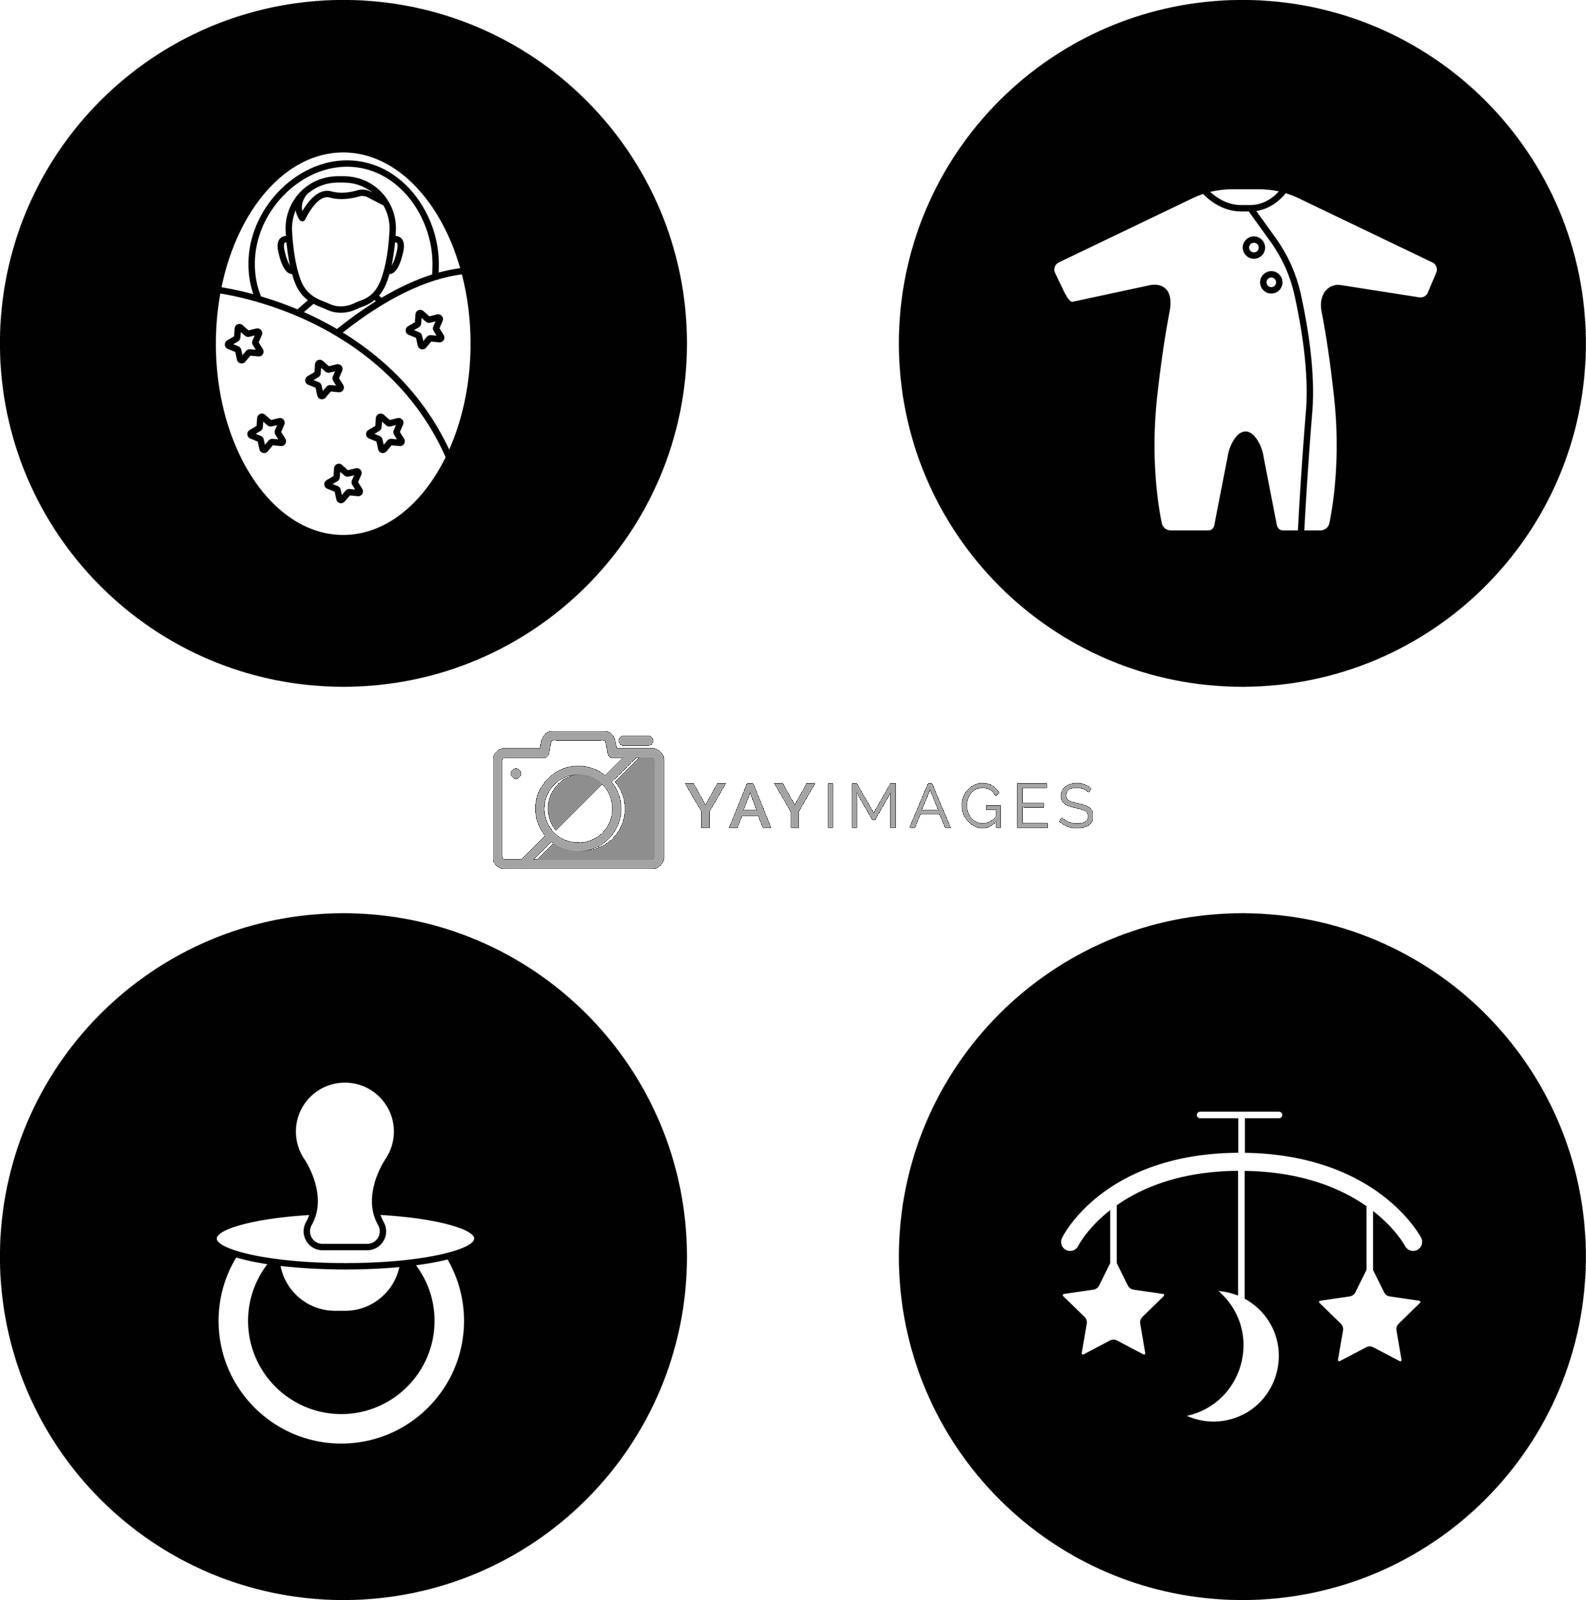 Royalty free image of Childcare glyph icons set by bsd